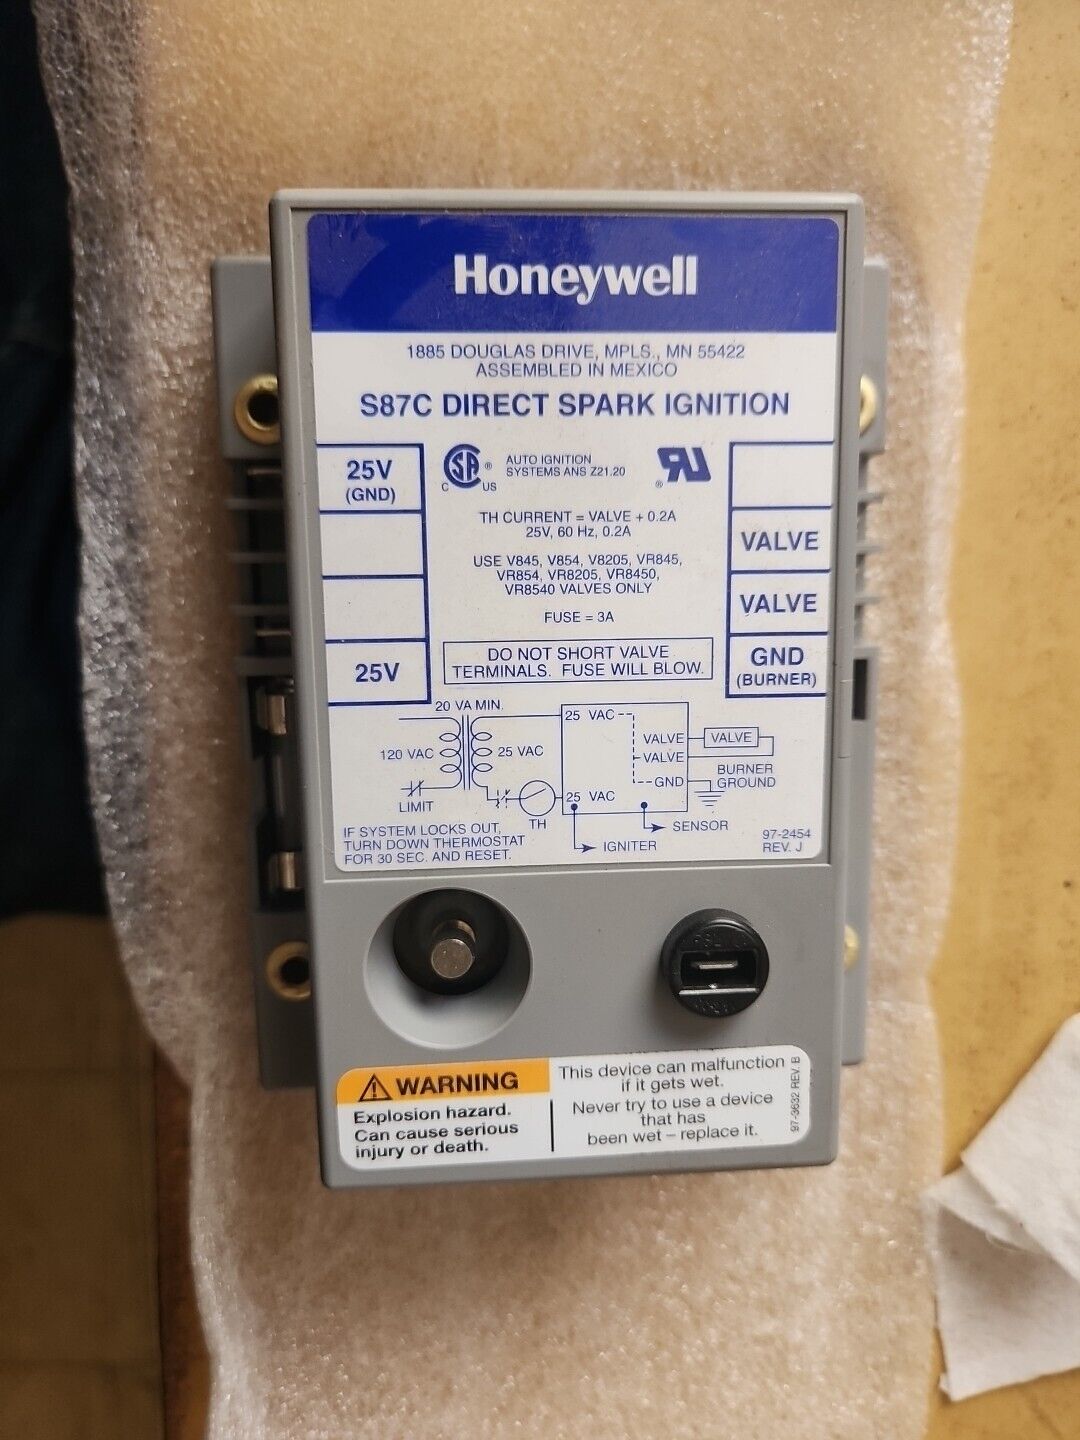 Honeywell S87c Direct Spark Ignition Control